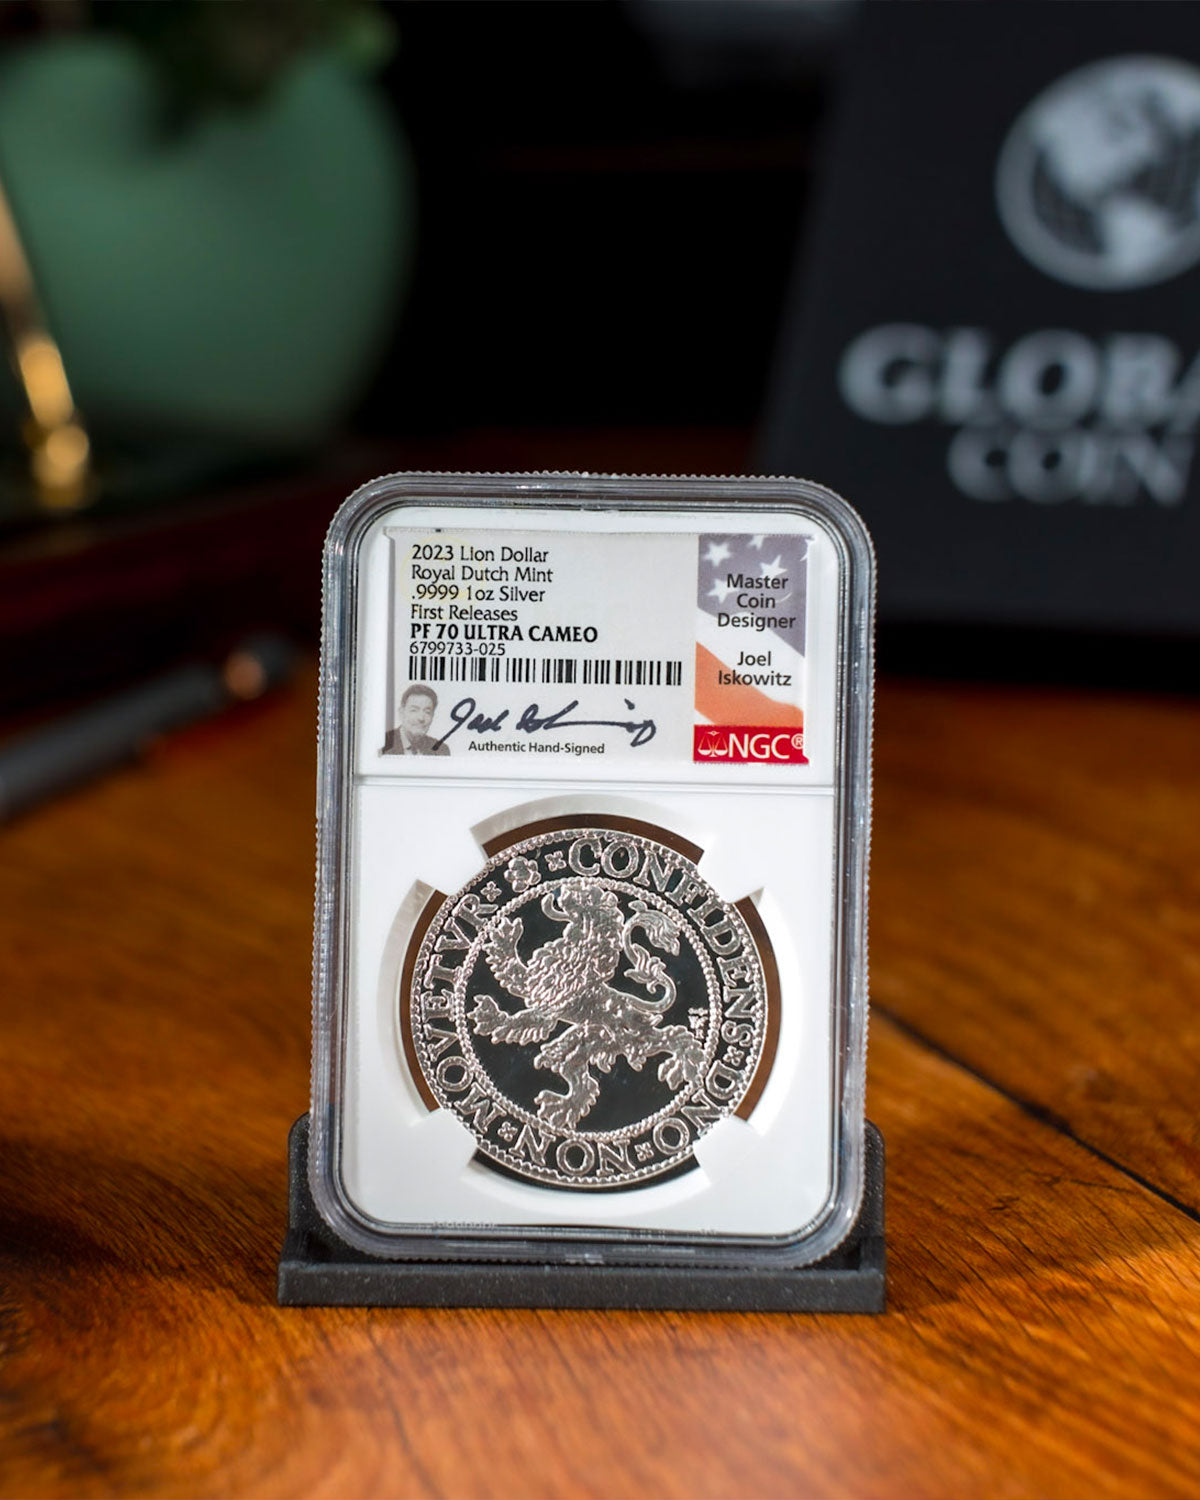 2023 Silver Lion Dollar Royal Dutch Mint | First Releases PF70 Ultra Cameo | Joel Iskowitz Autographed